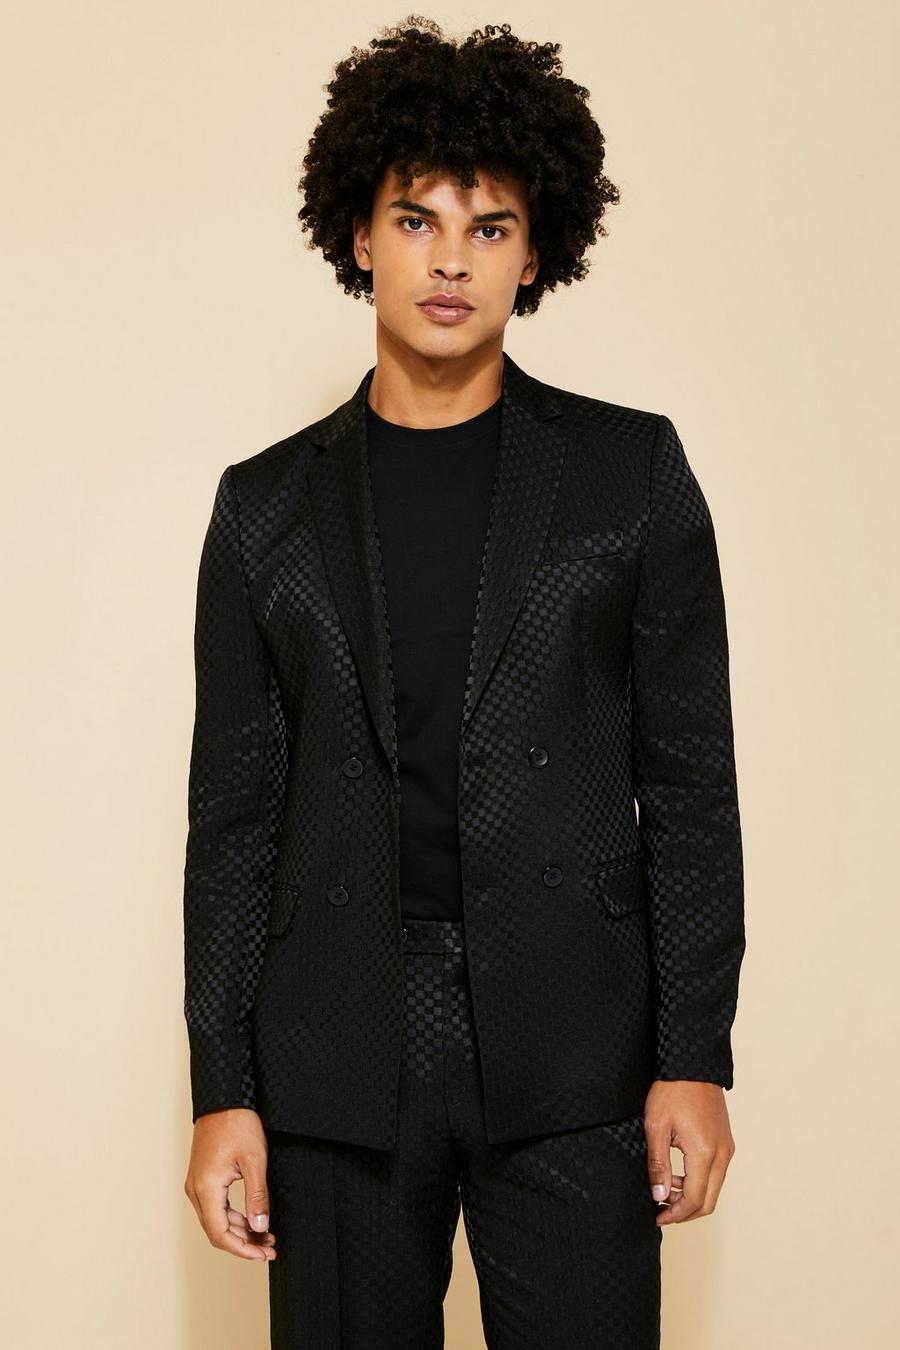 Boohoo Slim Fit Double Breasted Jacquard Suit Jacket in Black Womens Mens Clothing Mens Jackets Blazers 